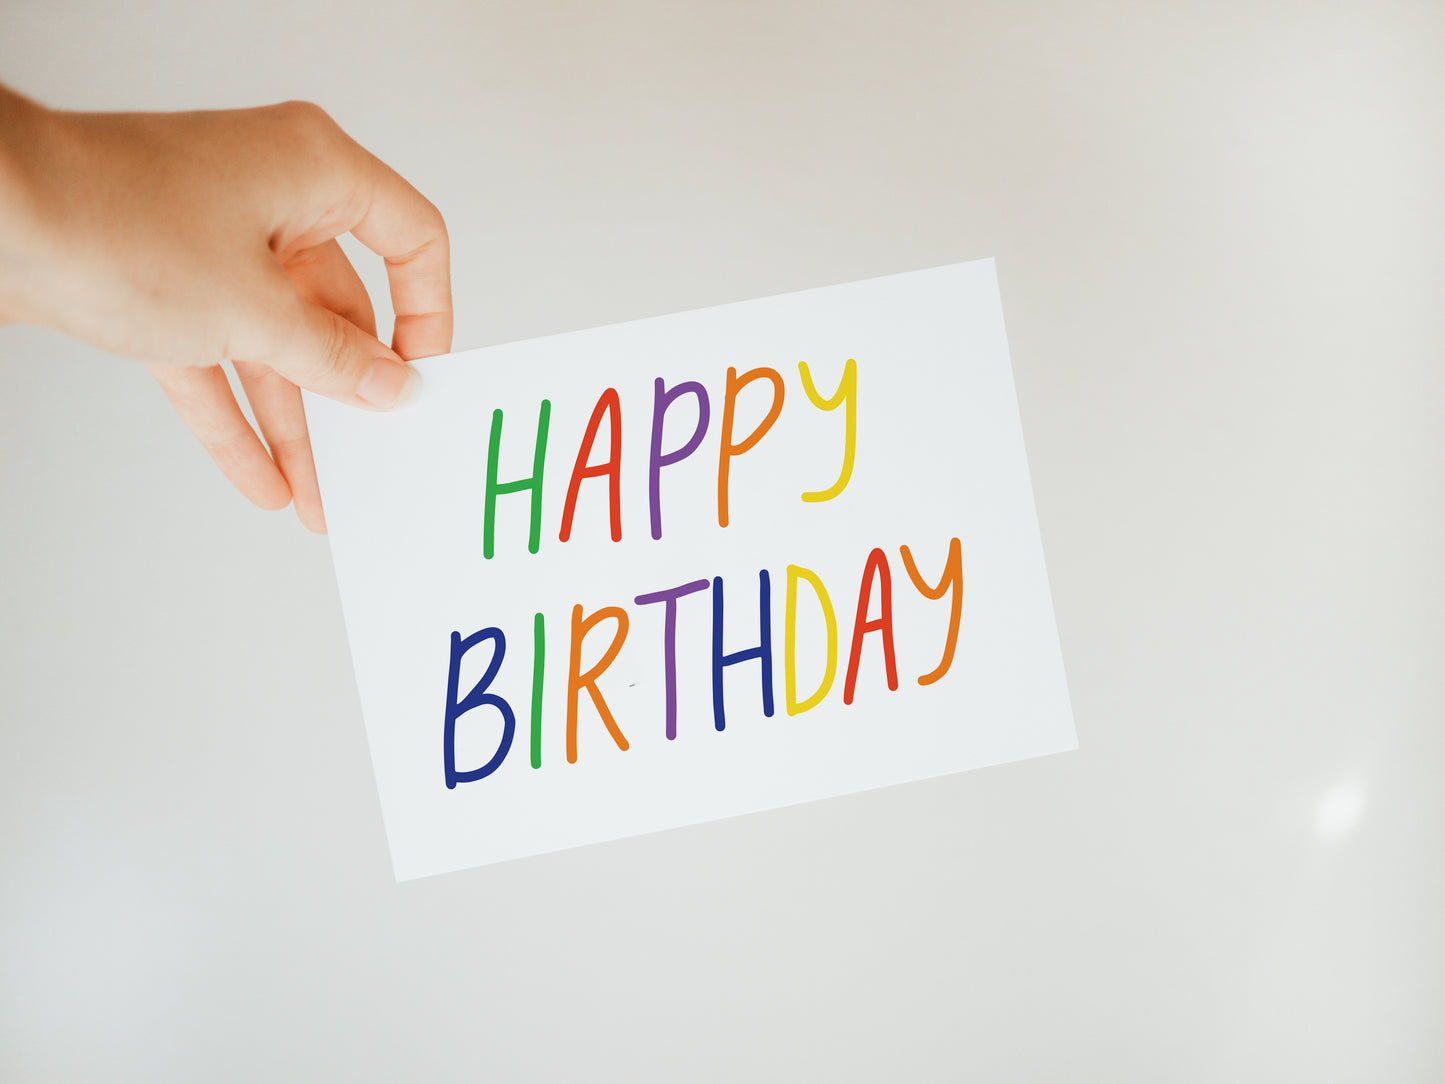 hand holding a white greeting card that says "happy birthday" in rainbow letters